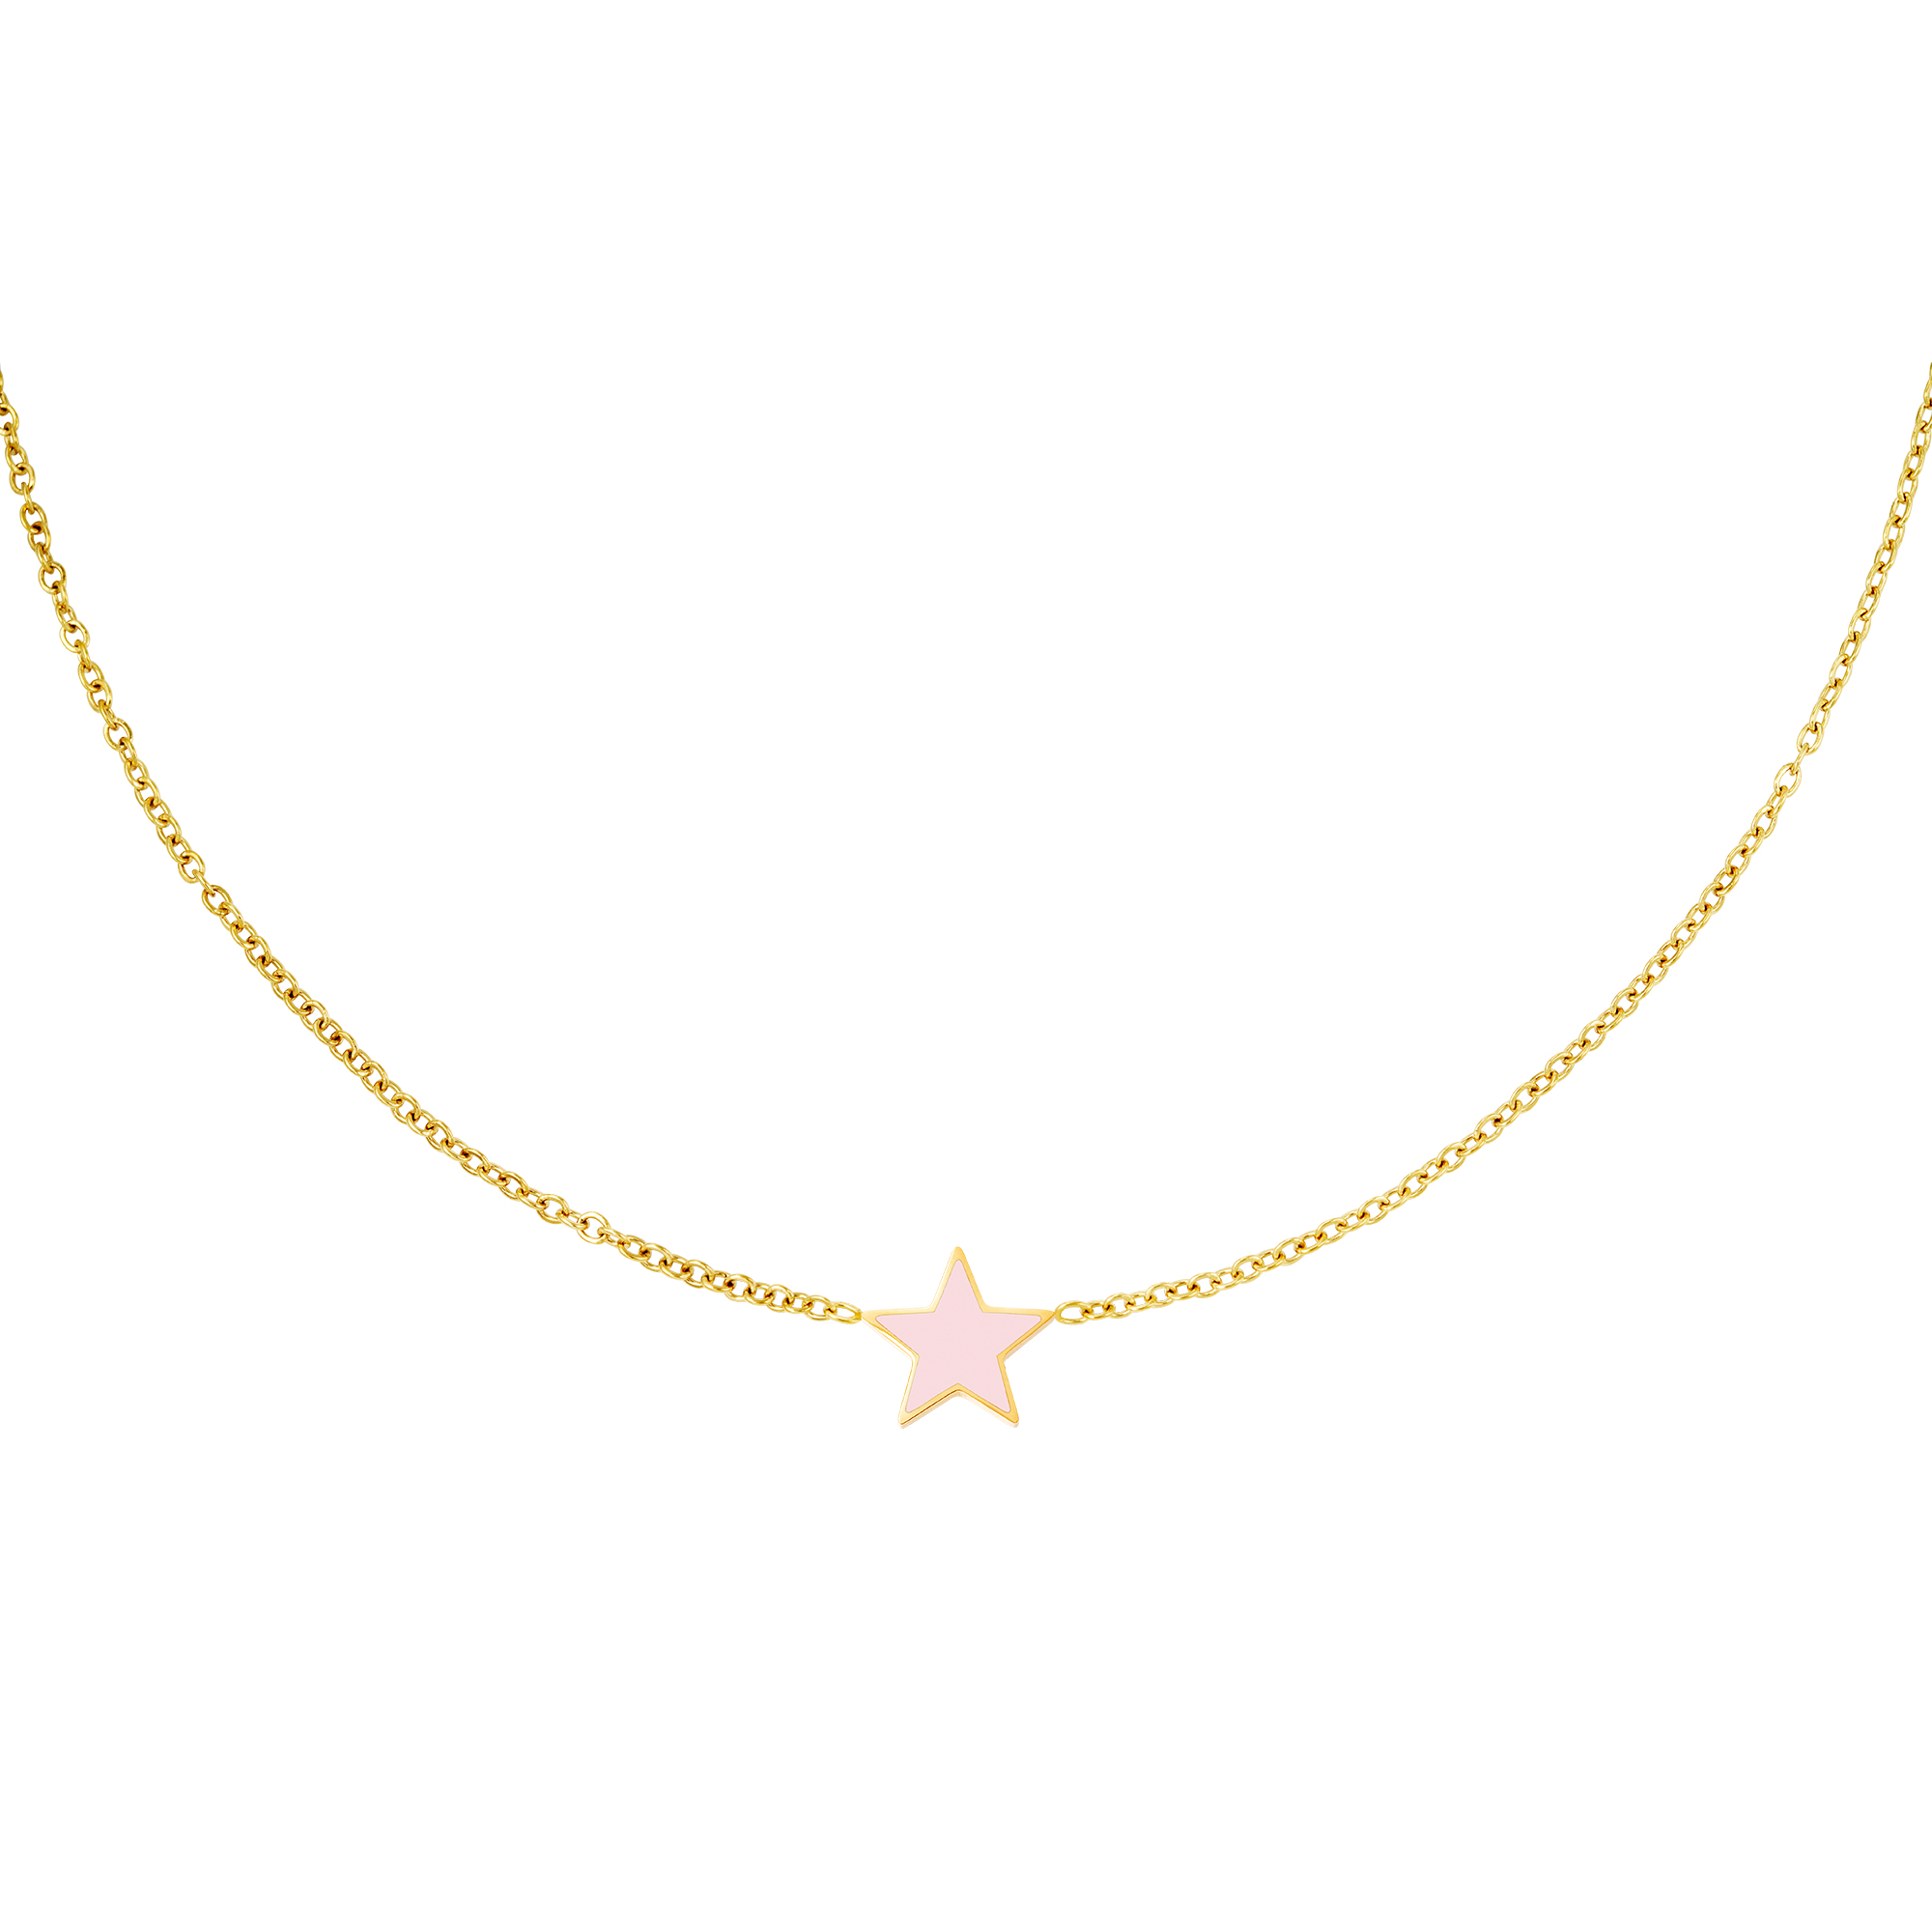 Stainless steel necklace star